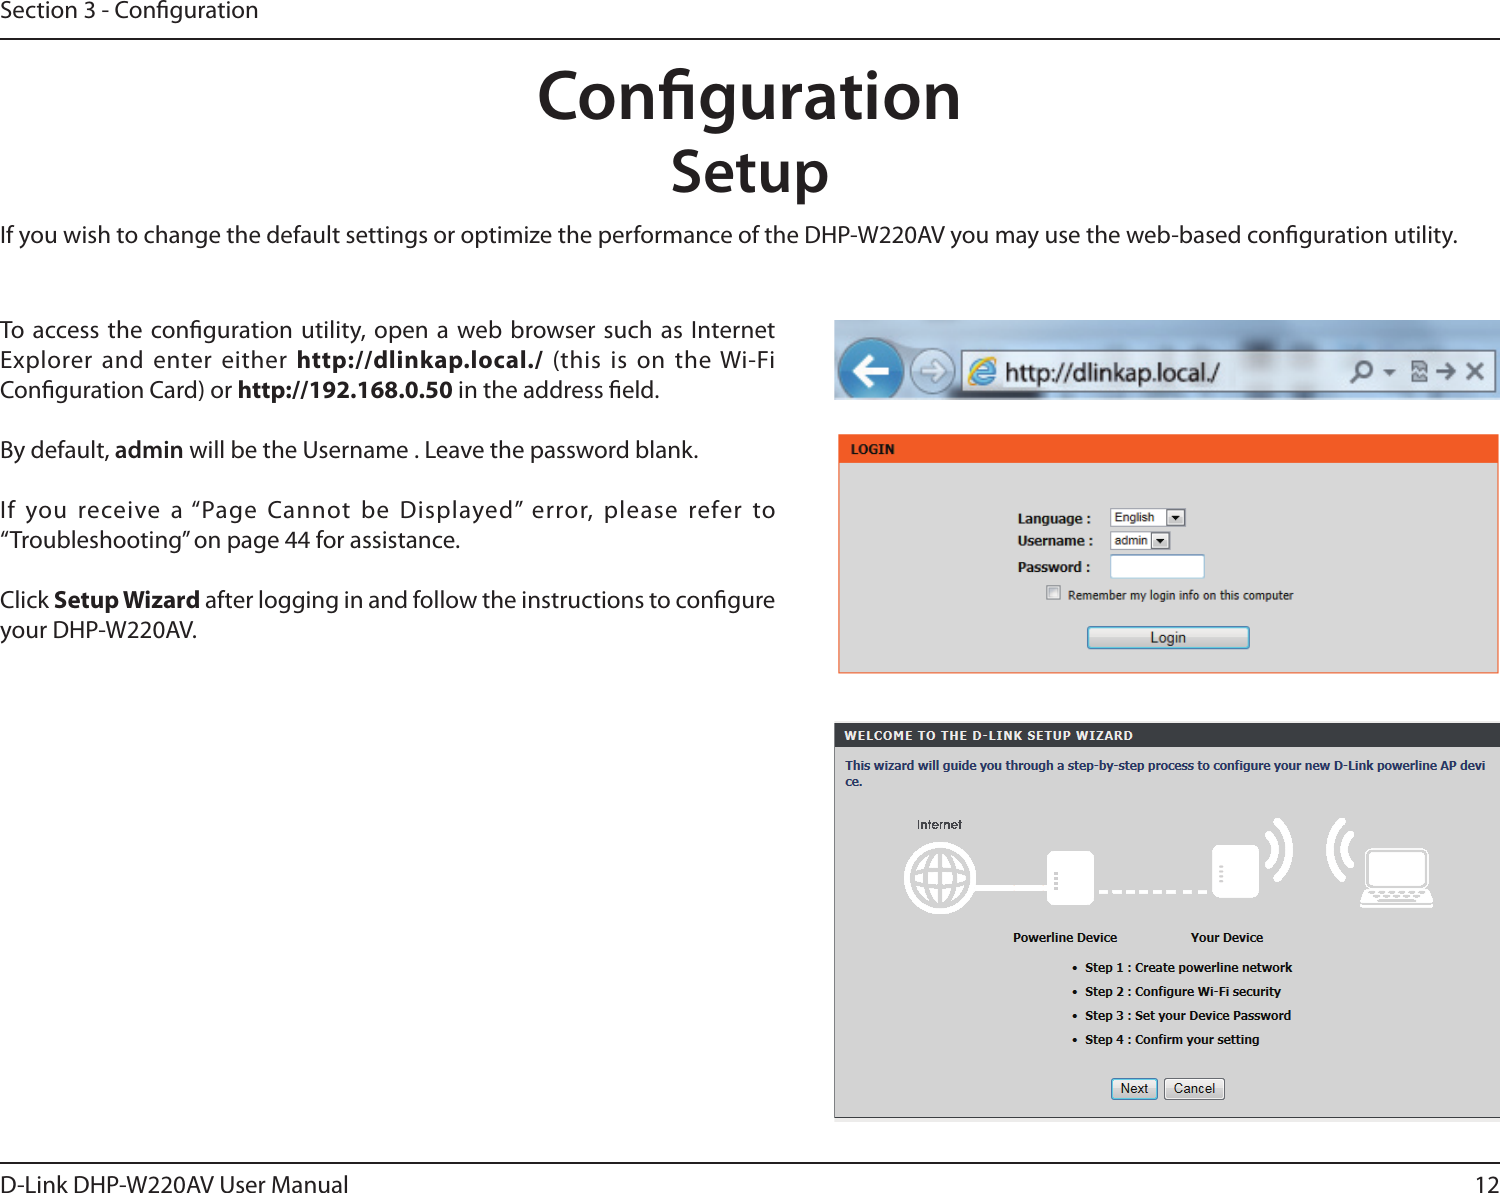 12D-Link DHP-W220AV User ManualSection 3 - CongurationCongurationSetupTo access the conguration utility, open a web browser such as Internet Explorer and enter either http://dlinkap.local./ (this is on the Wi-Fi Conguration Card) or http://192.168.0.50 in the address eld.By default, admin will be the Username . Leave the password blank.If you receive a “Page Cannot be Displayed” error, please refer to “Troubleshooting” on page 44 for assistance.Click Setup Wizard after logging in and follow the instructions to congure your DHP-W220AV.If you wish to change the default settings or optimize the performance of the DHP-W220AV you may use the web-based conguration utility.